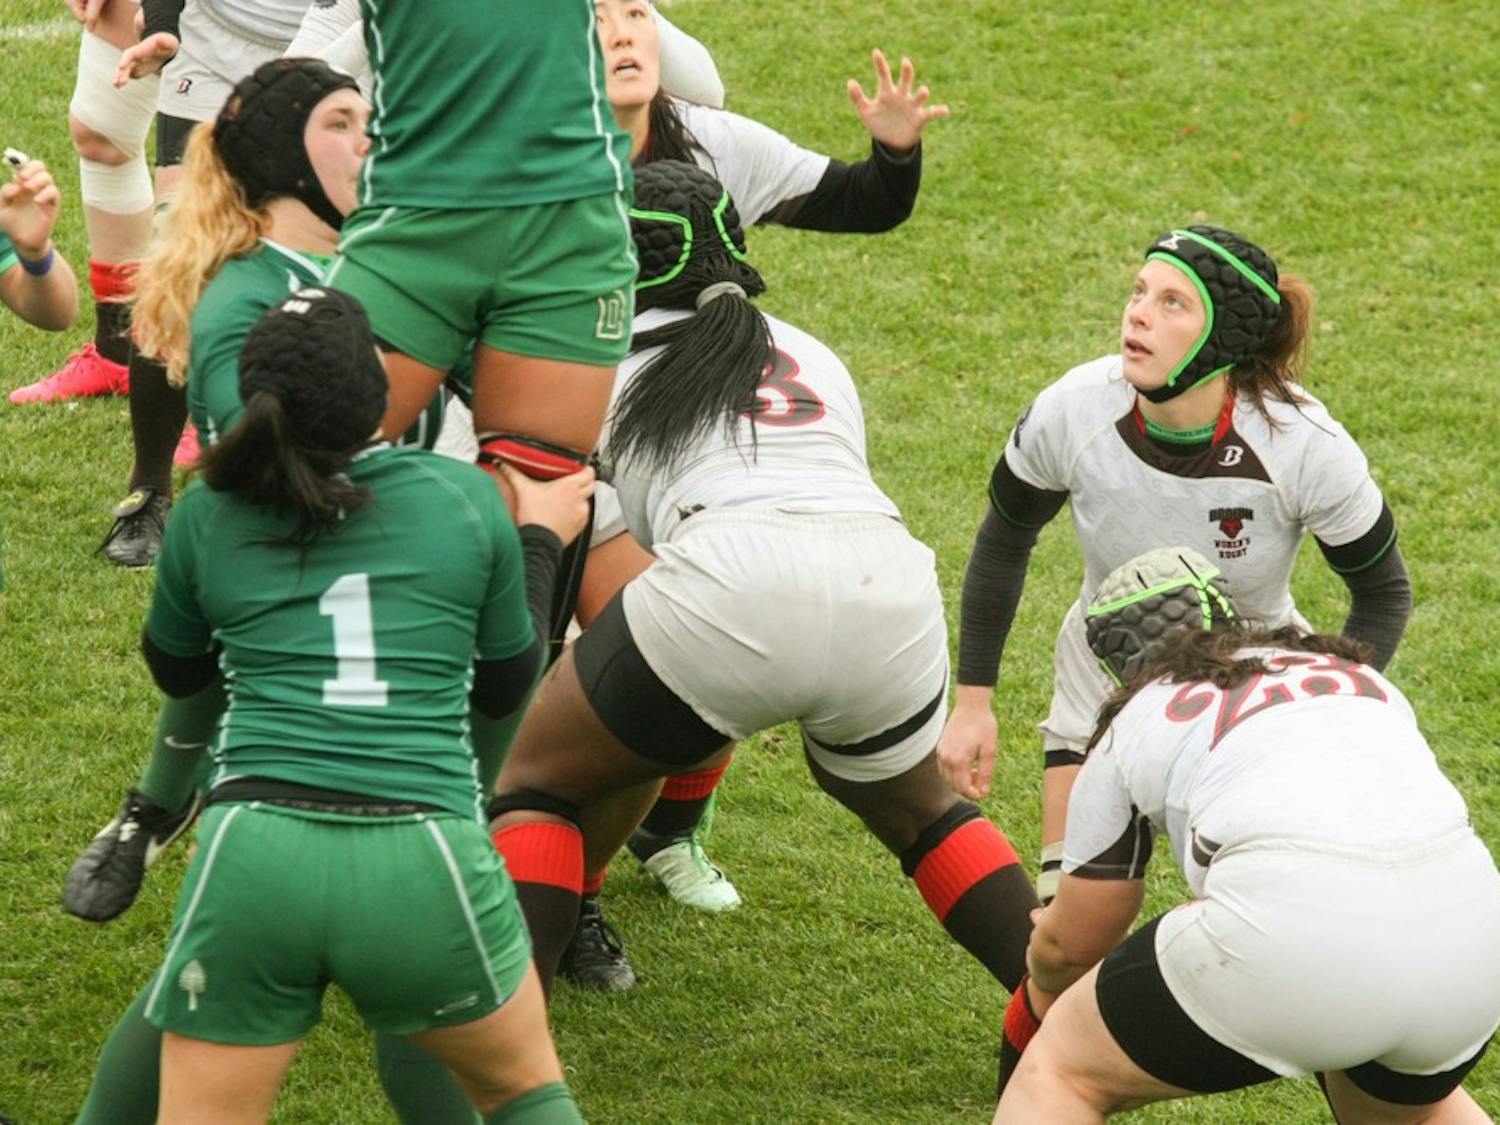 The No. 1 rugby team will host the Ivy League Championship on Oct. 28.